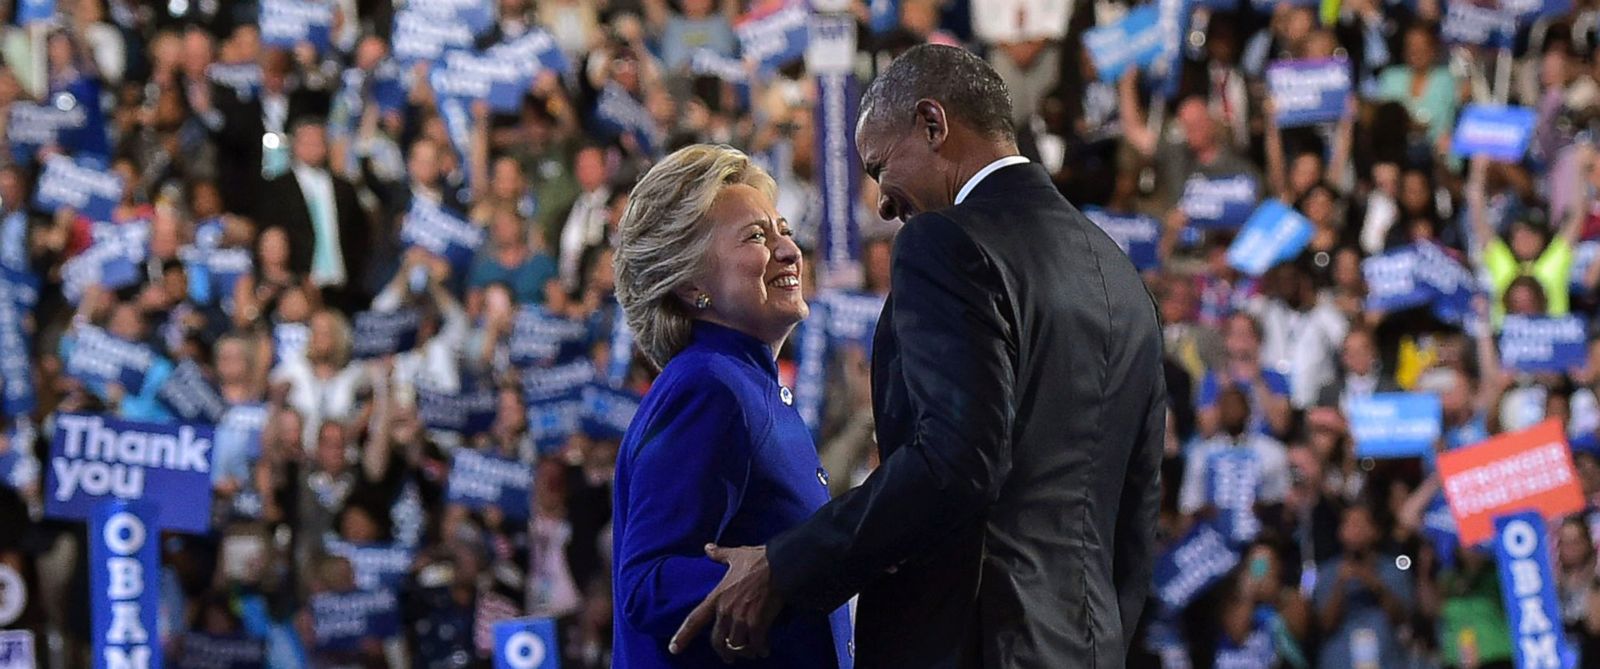 PHOTO: President Barack Obama is joined by Democratic presidential nominee Hillary Clinton after his address to the Democratic National Convention in Philadelphia, July 27, 2016.